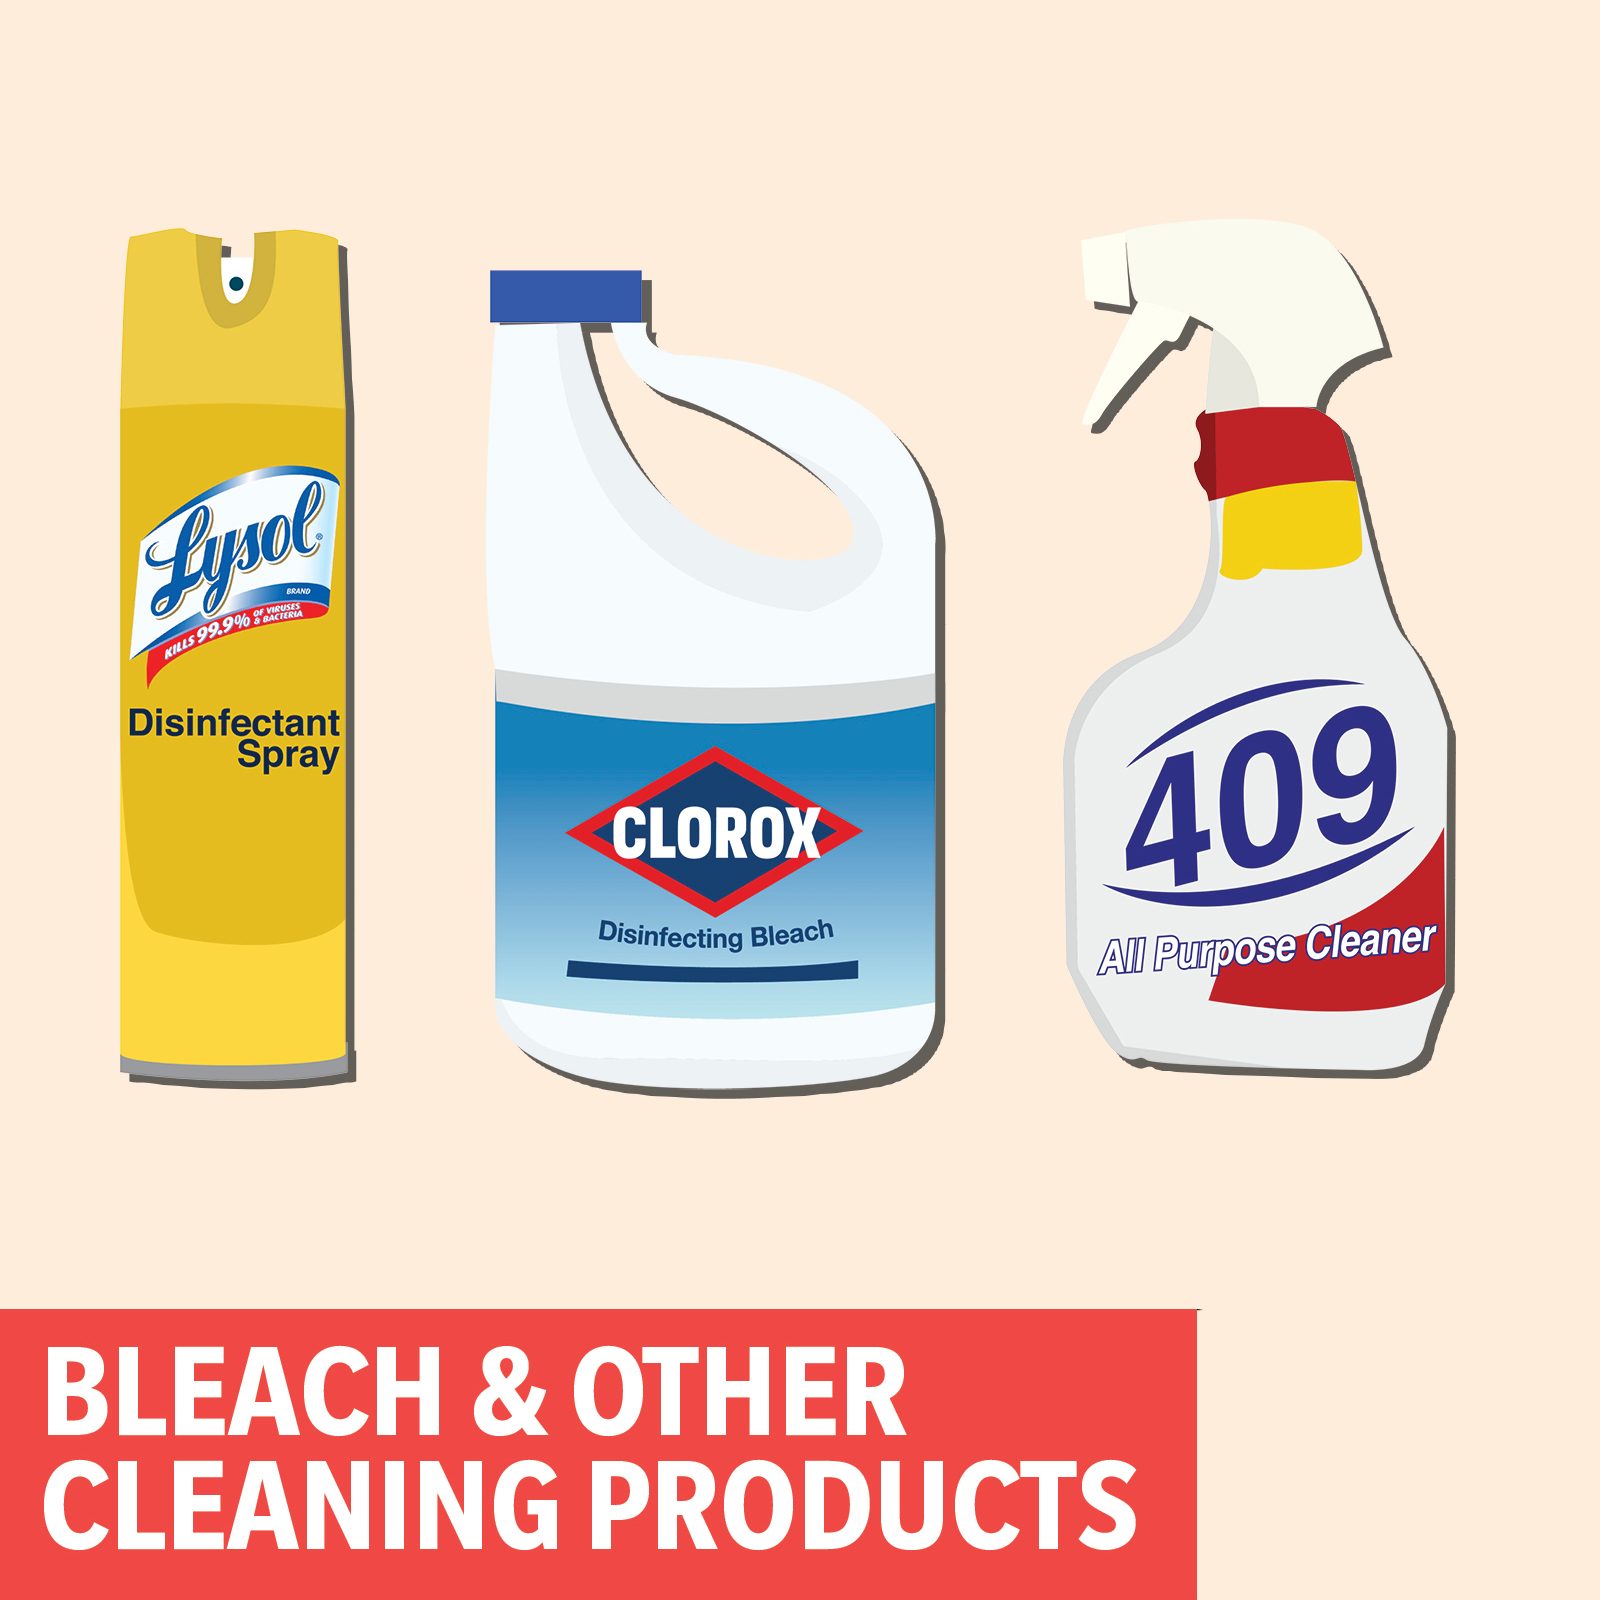 https://www.tasteofhome.com/wp-content/uploads/2018/12/Bleach-and-Other-Cleaning-Products-2.jpg?fit=700%2C700